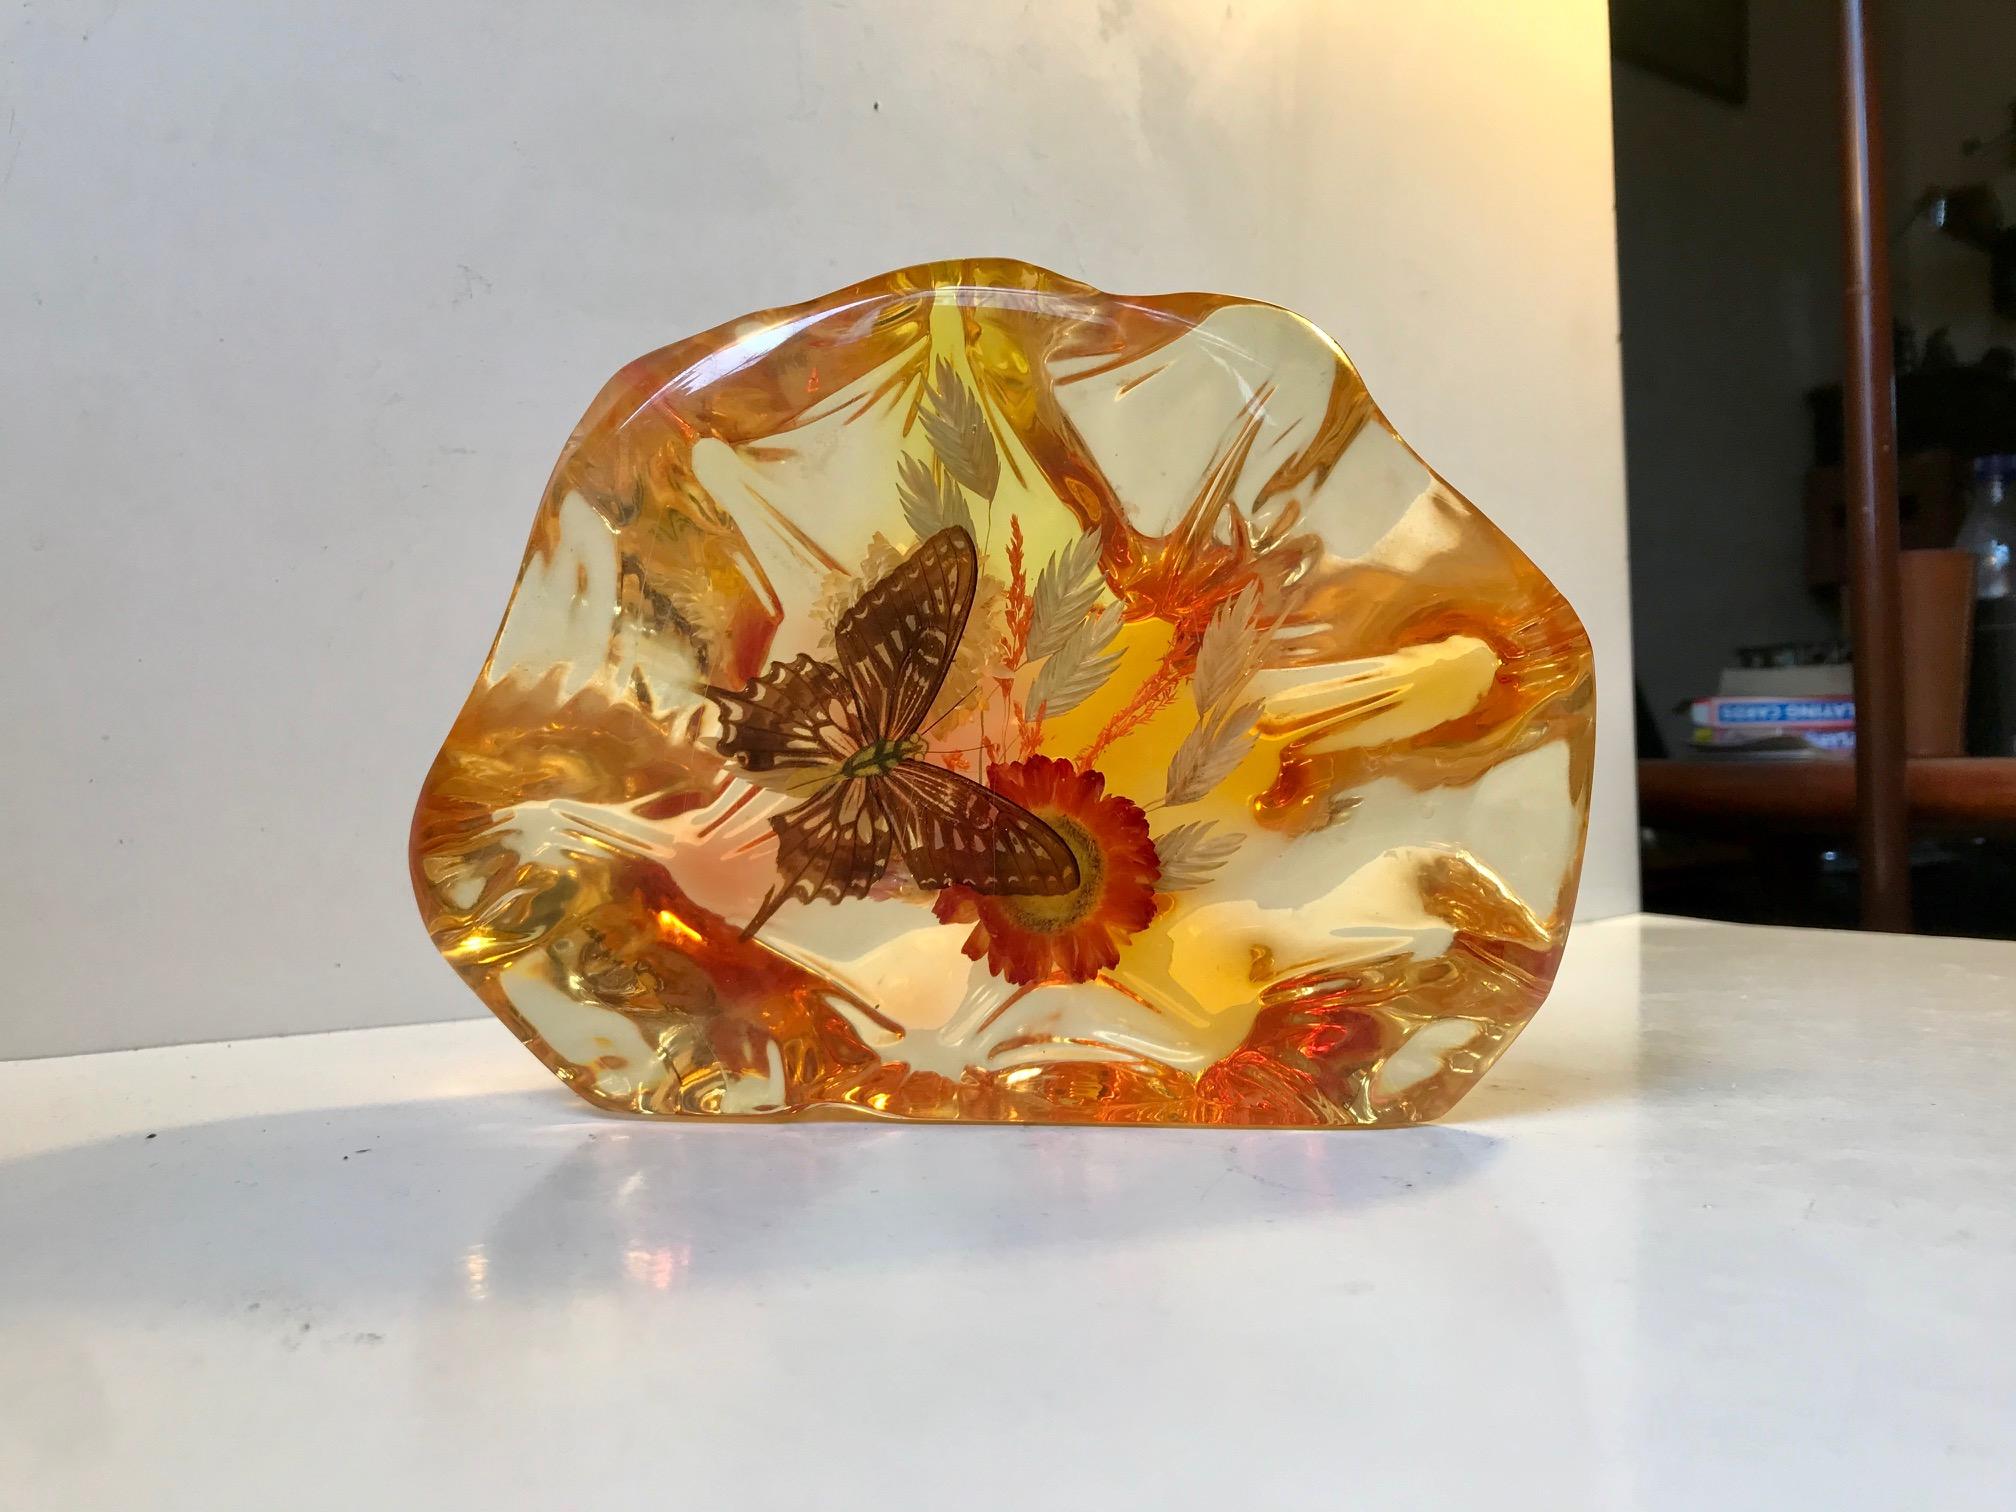 Decorative micro-cosmos in translucent sculpted Lucite. Encapsulated arrangement with flowers and a butterfly. handmade in Italy during the 1960s by an anonymous maker/craftsman. Suitable as a desk sculpture or bookend.